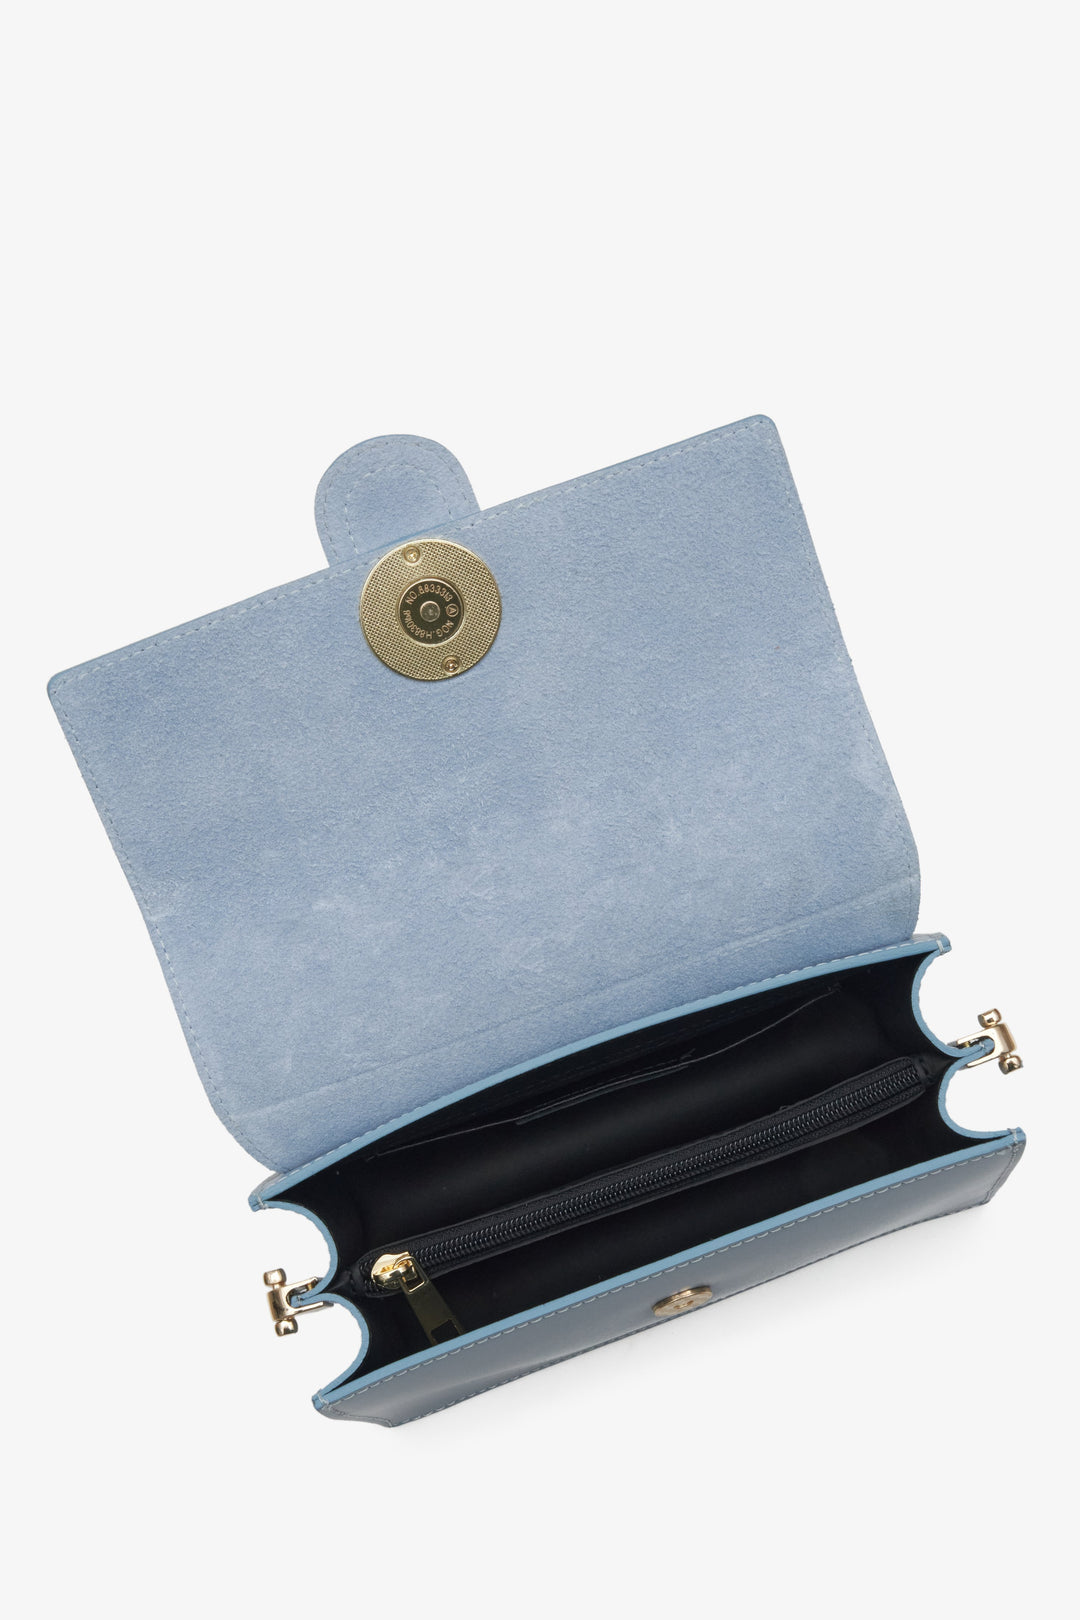 Women's light blue handy bag made with Italian leather - presentation of the main compartments.